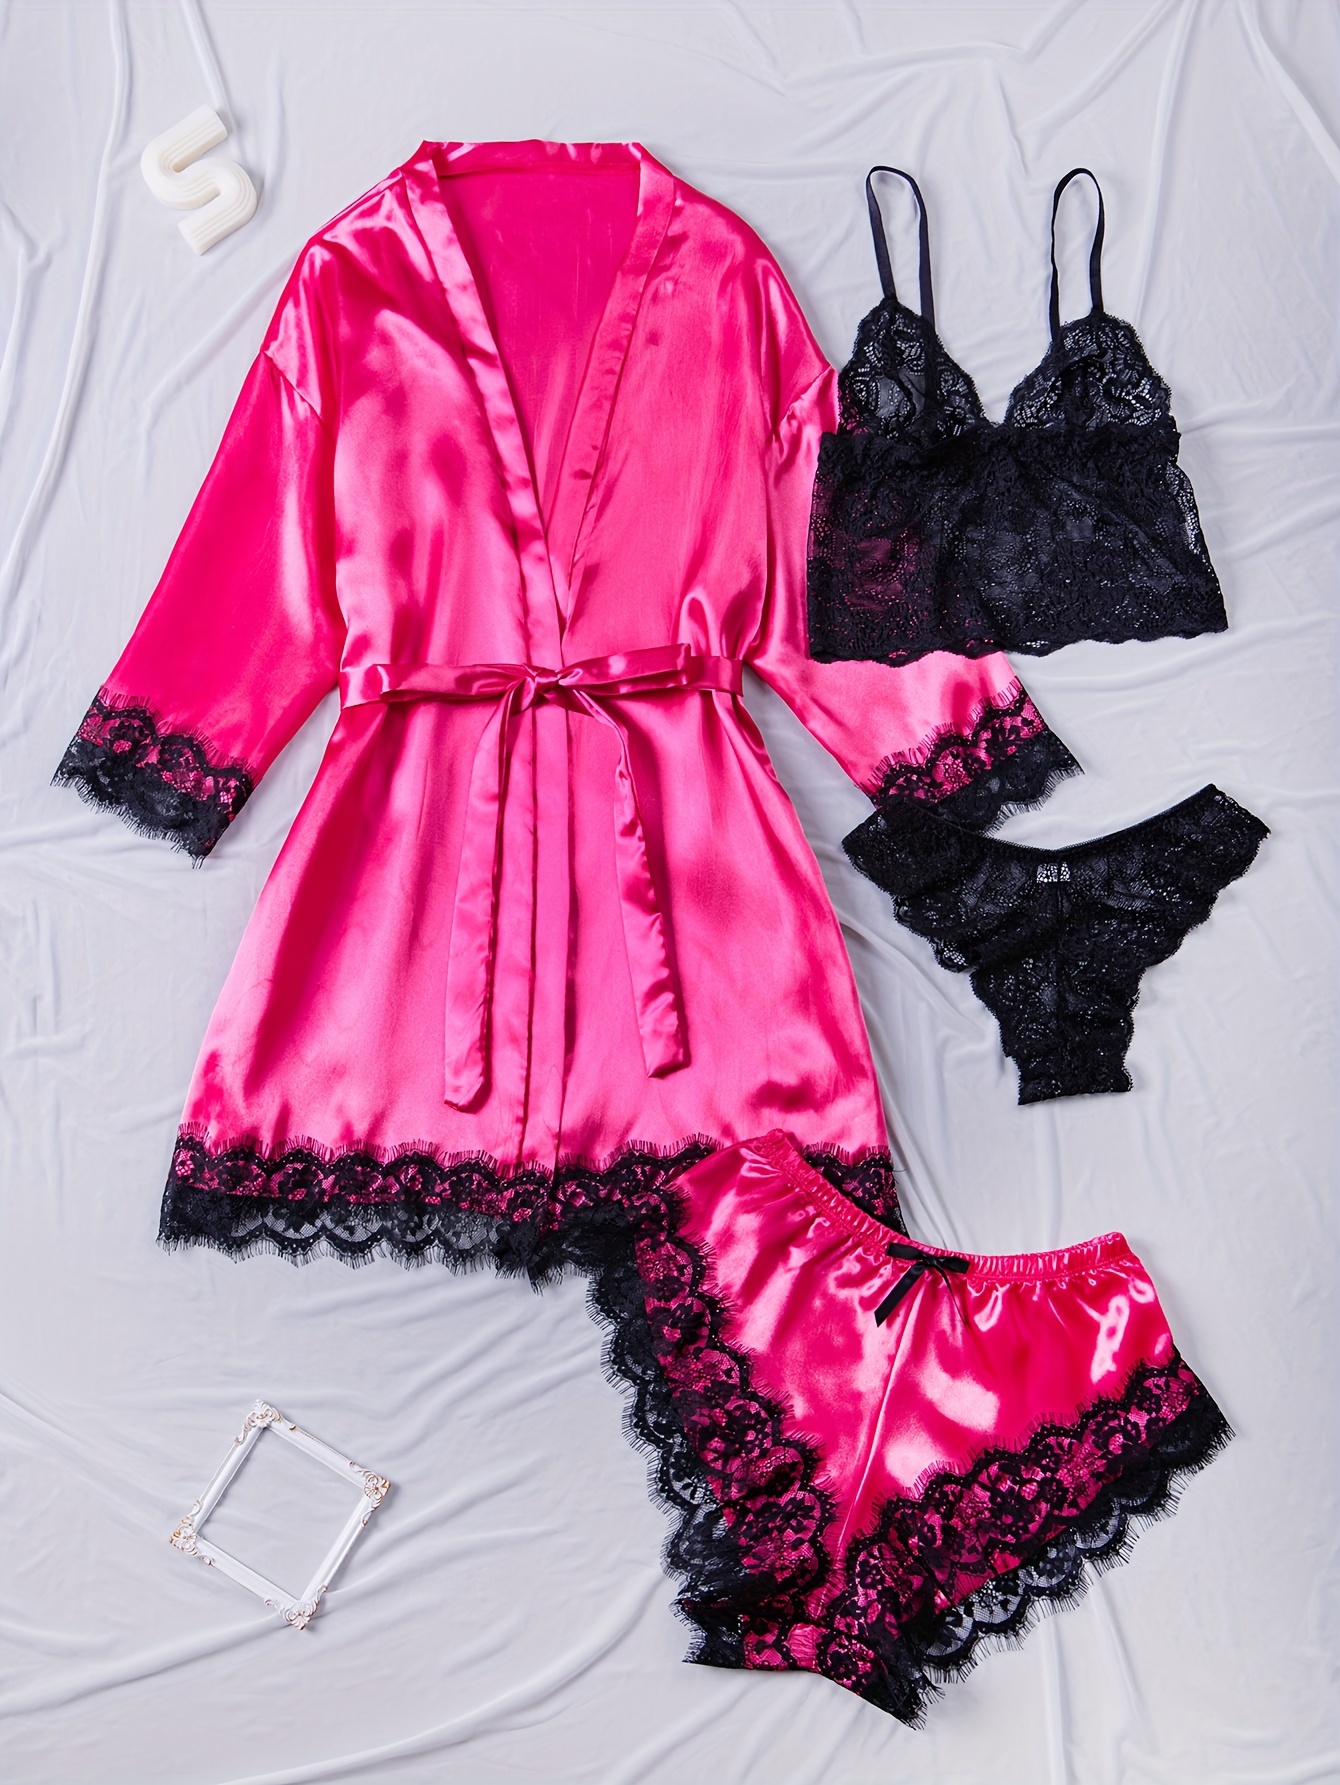 Women's 4 Pieces Comfortable Satin Floral Lace Cami Top Lingerie Pajama Set  With Robe For Valentine's Gifts